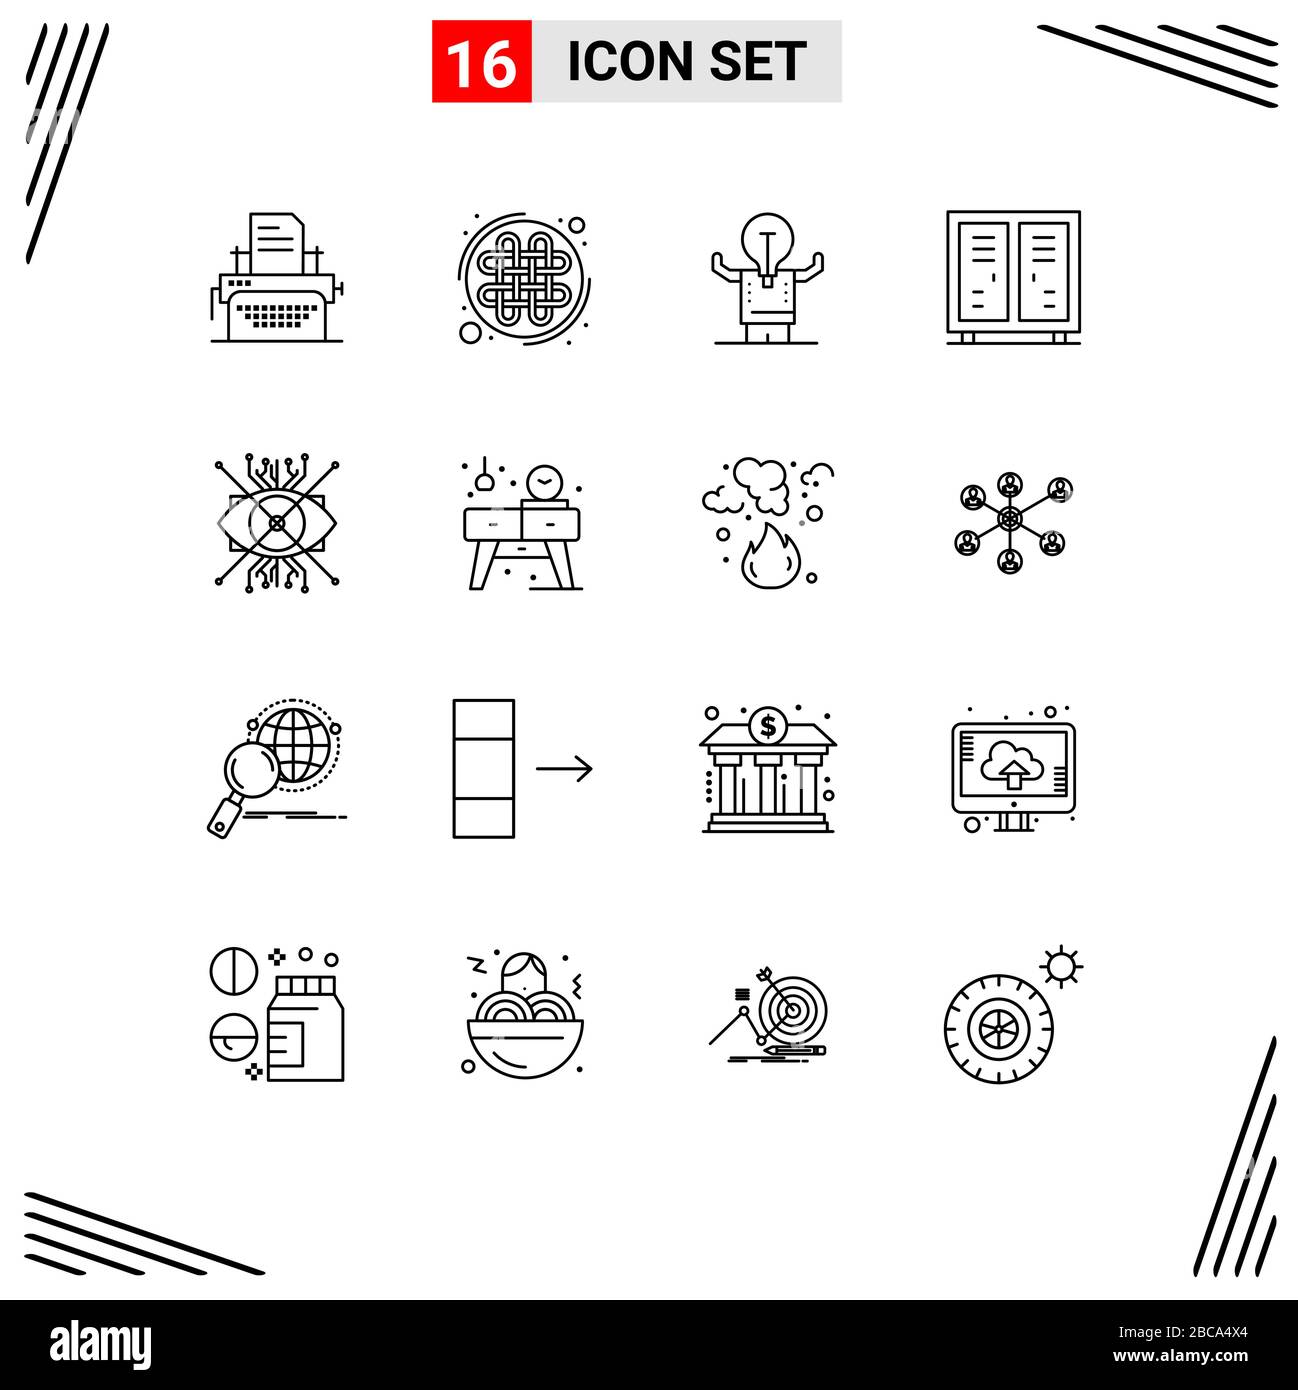 Universal Icon Symbols Group of 16 Modern Outlines of game, athletics, business, athlete, potential Editable Vector Design Elements Stock Vector